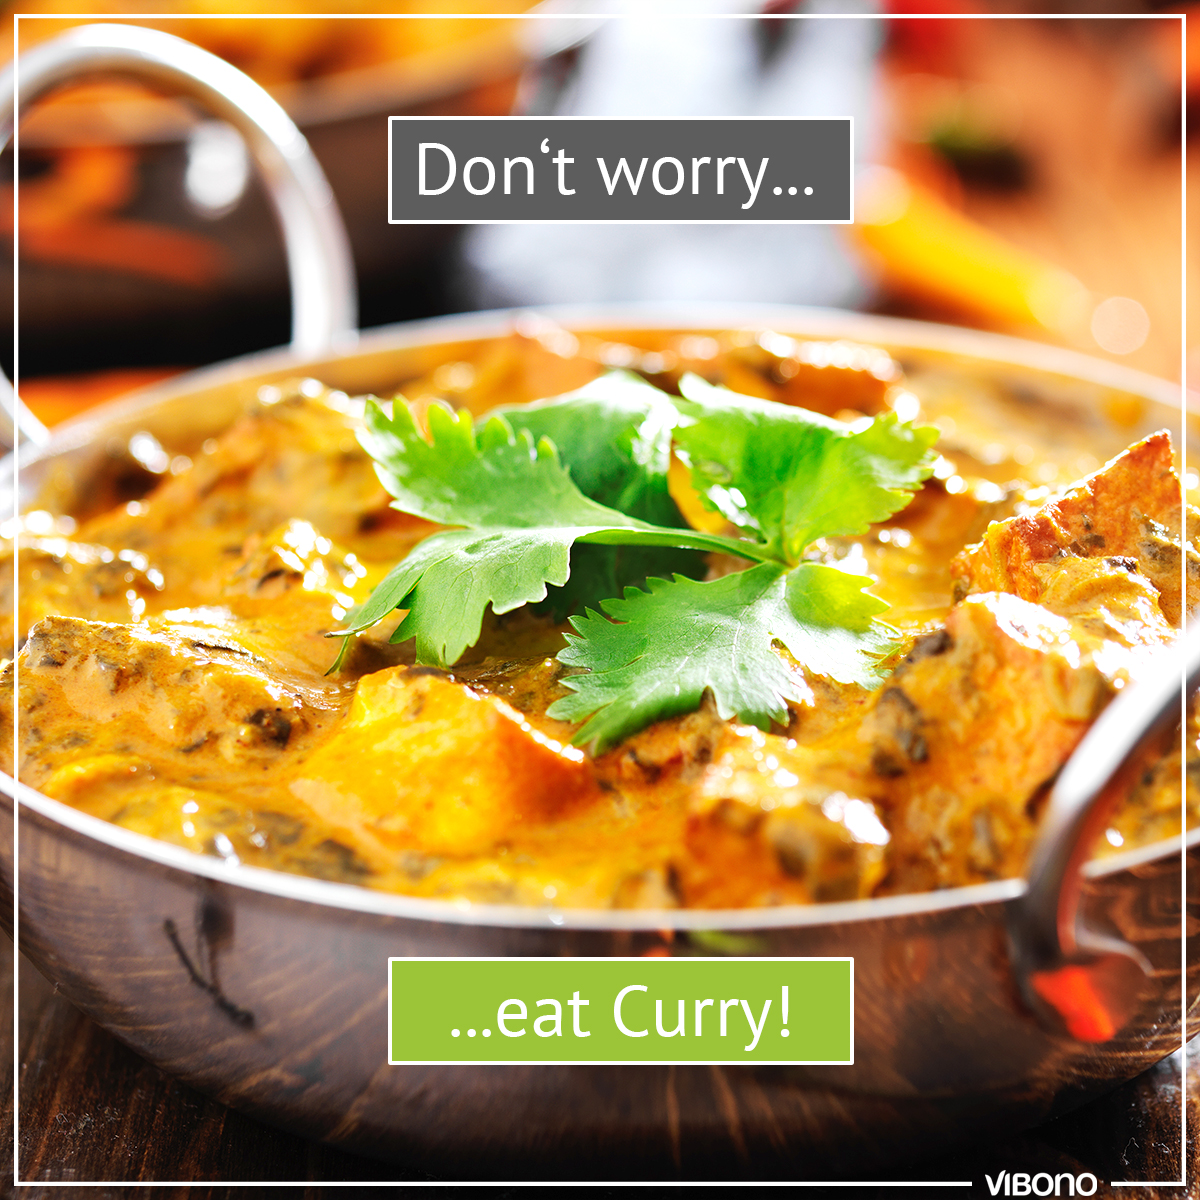 Don’t worry, eat Curry!